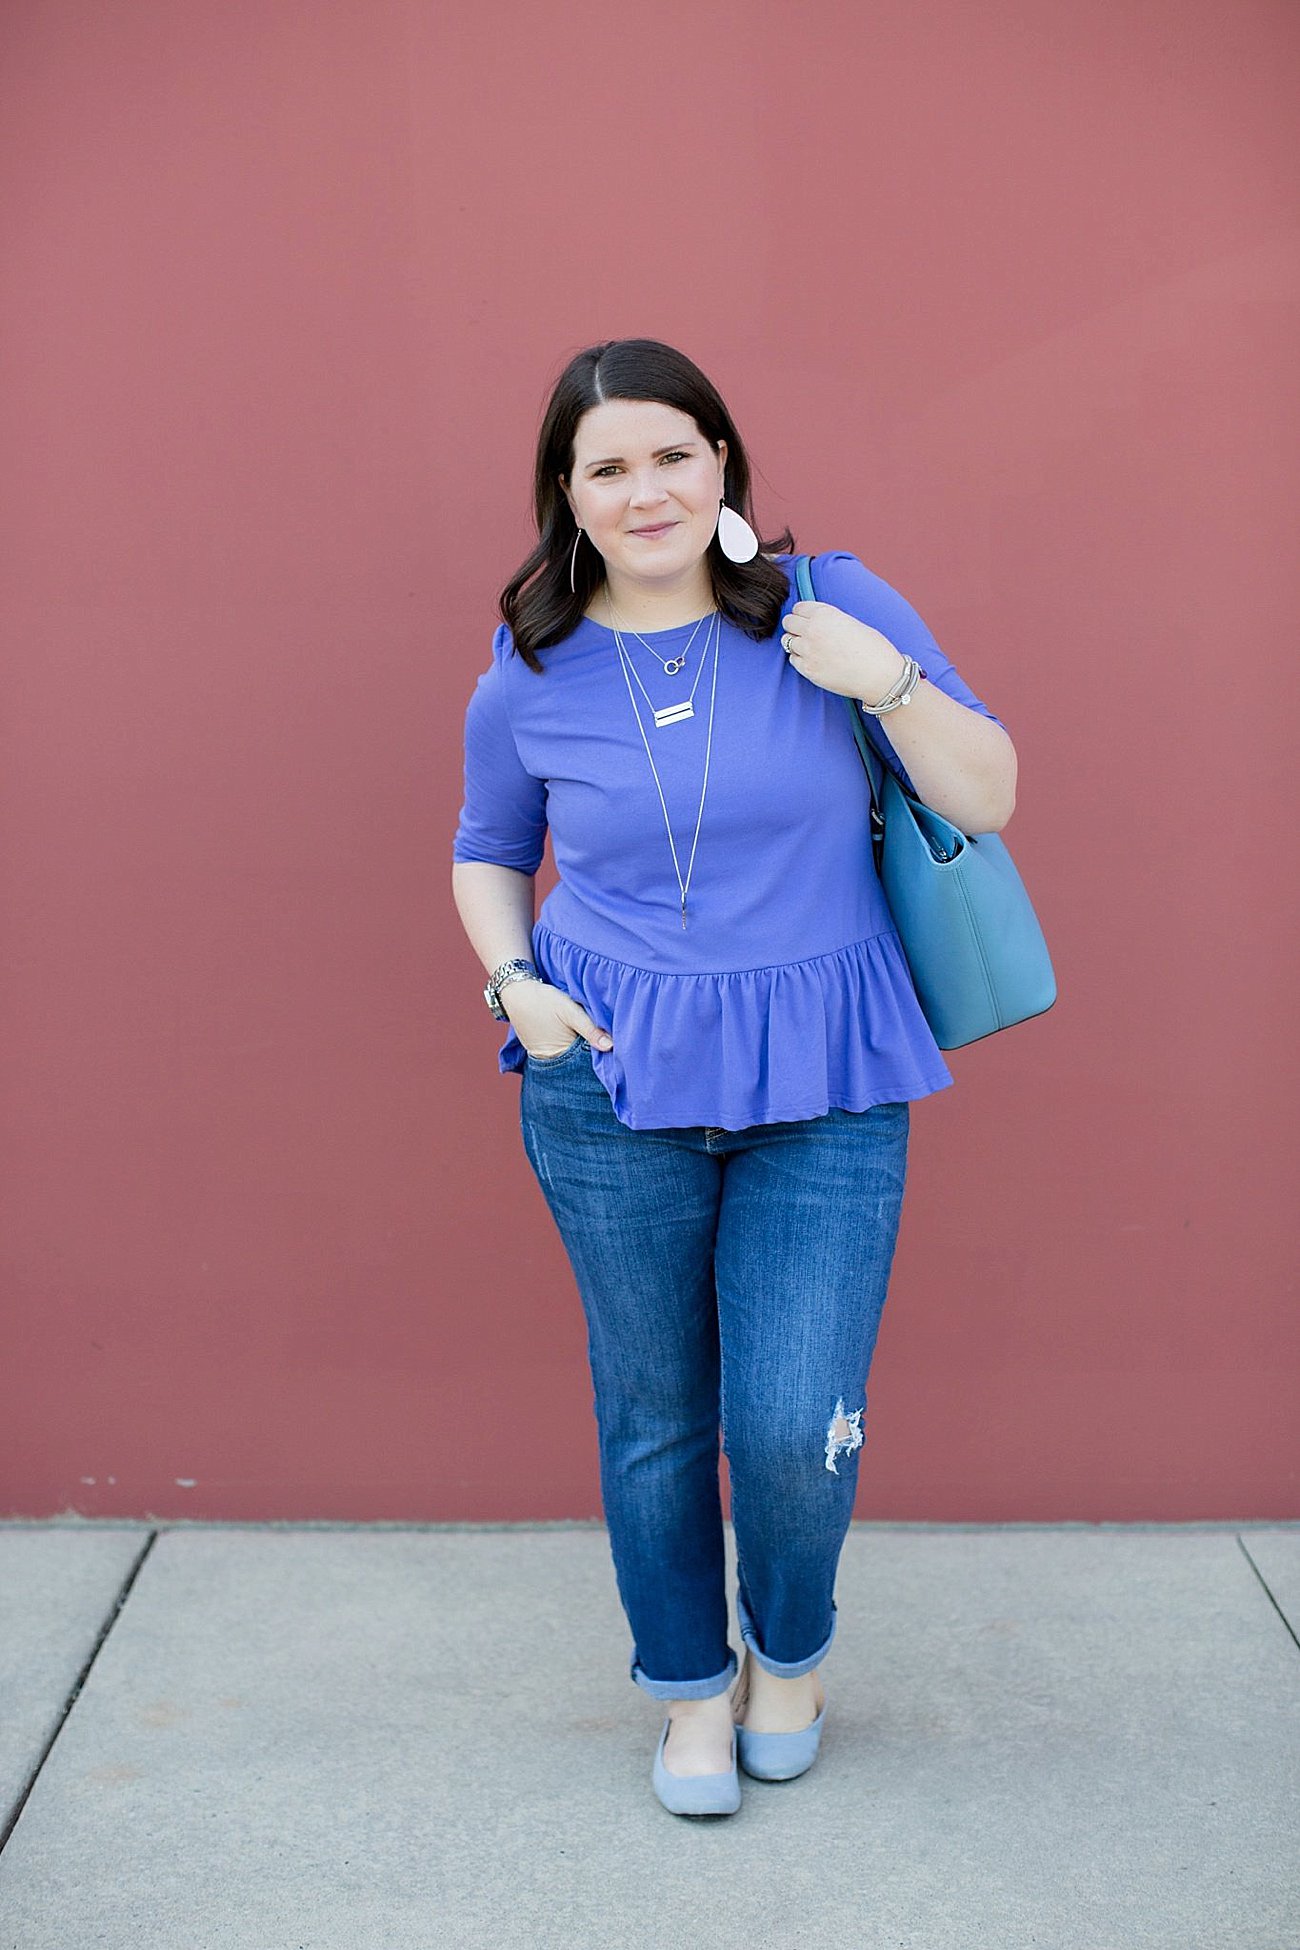 Elegantees Rebecca Top, The Flourish Market, Kut from the Kloth Kate Distressed Boyfriend Jean, The Root Collective Gaby Ballet Flat, Nickel and Suede earrings, Michael Kors tote | Mom Style | North Carolina Fashion & Style Blogger (8) (7)